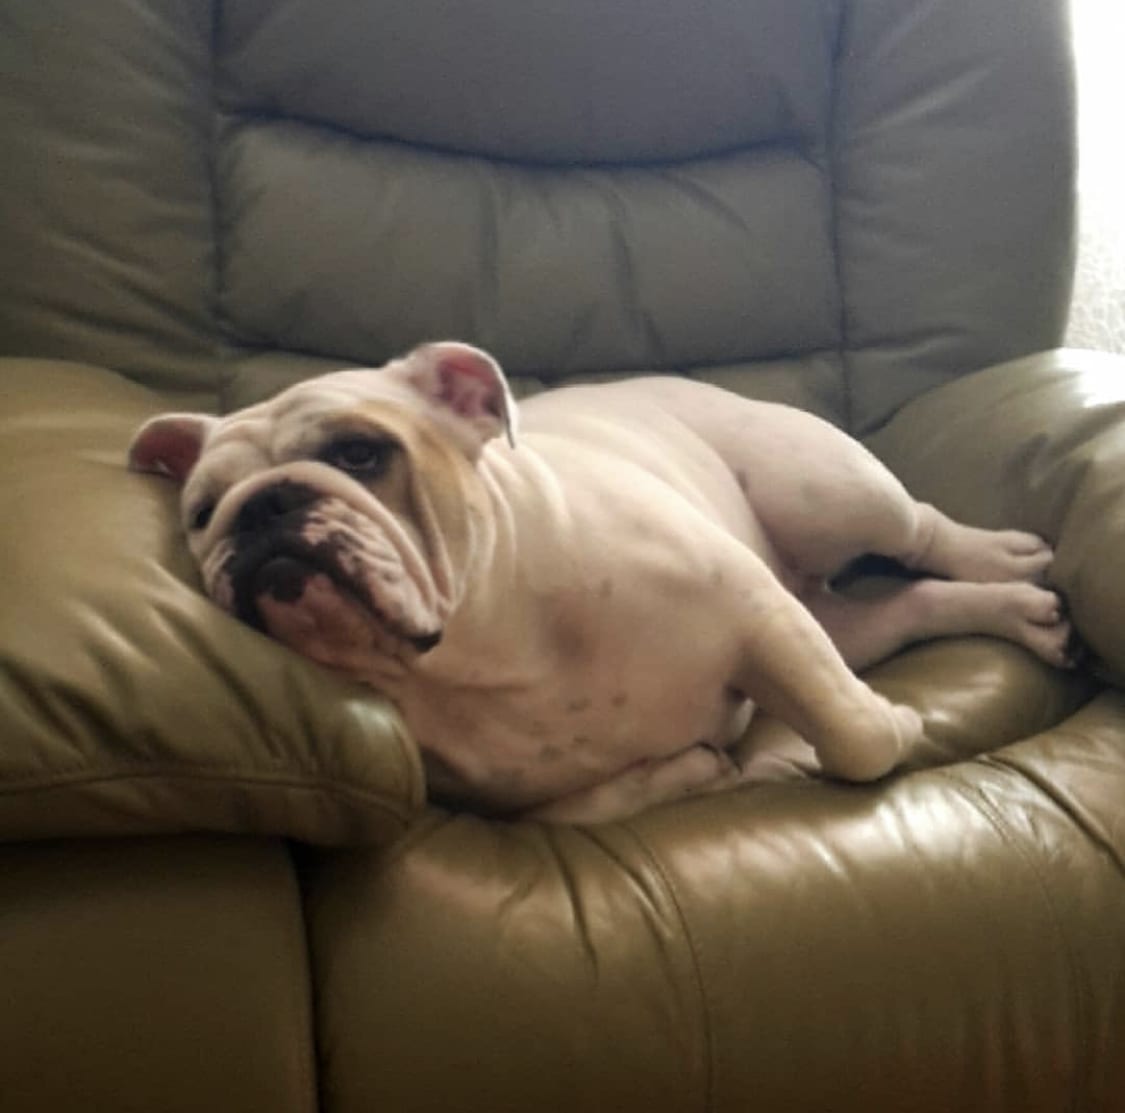 An English Bulldog lying on the couch with its sleepy face